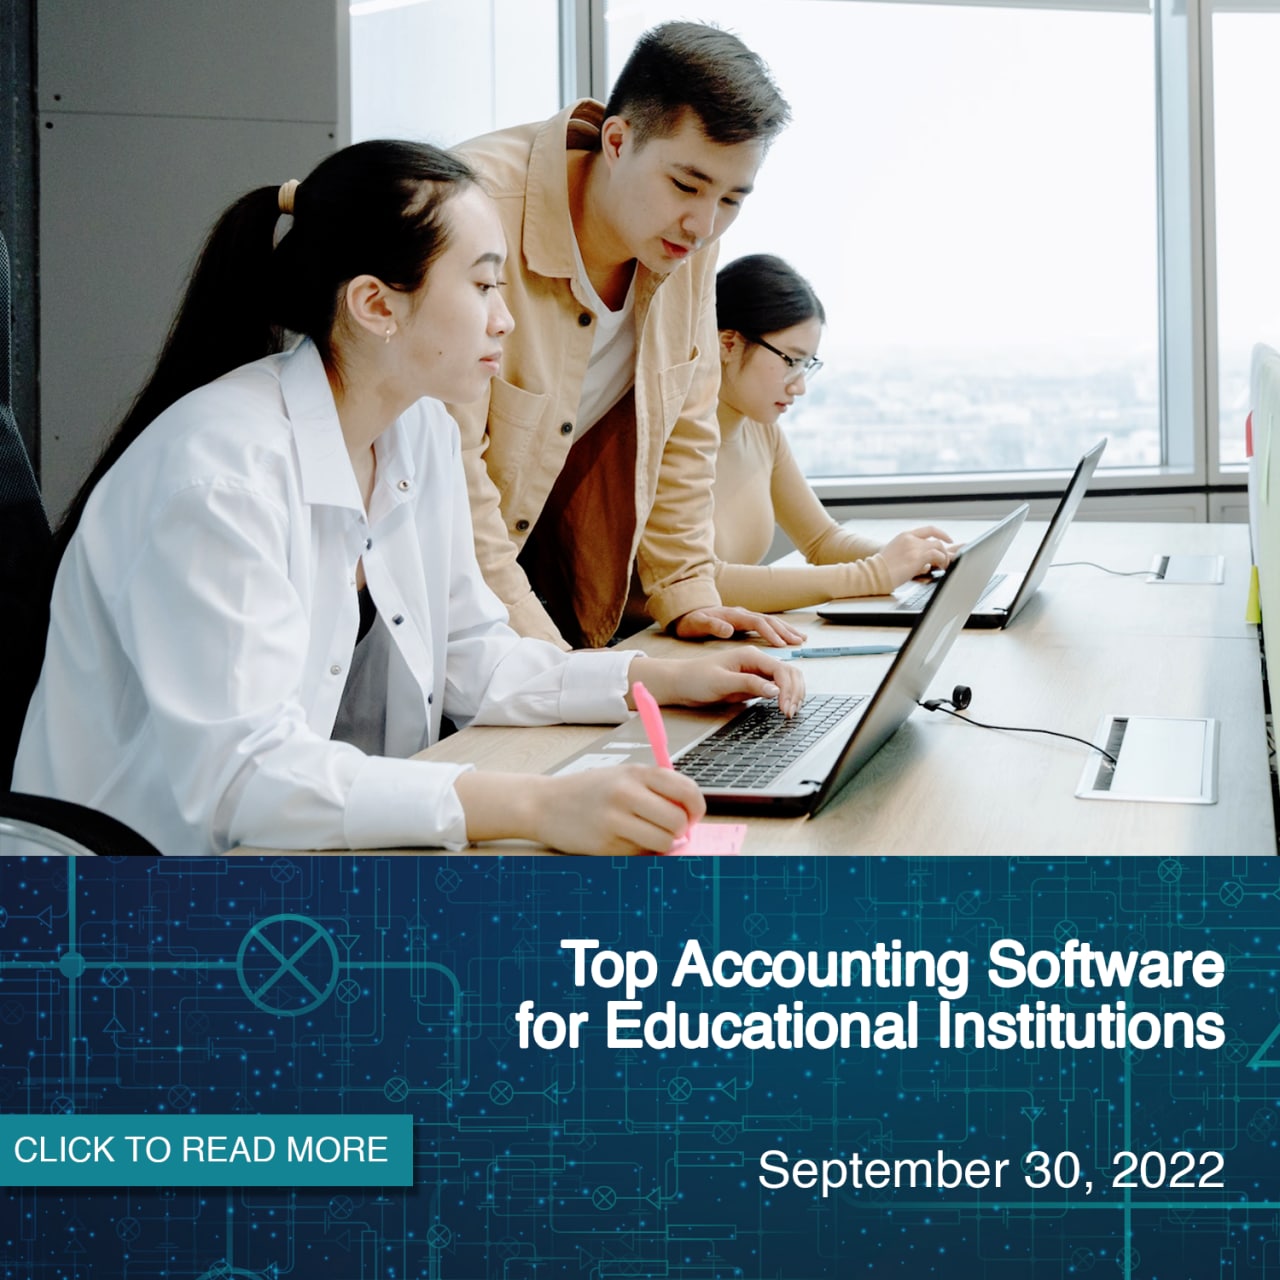 Top Accounting Software for Educational Institutions